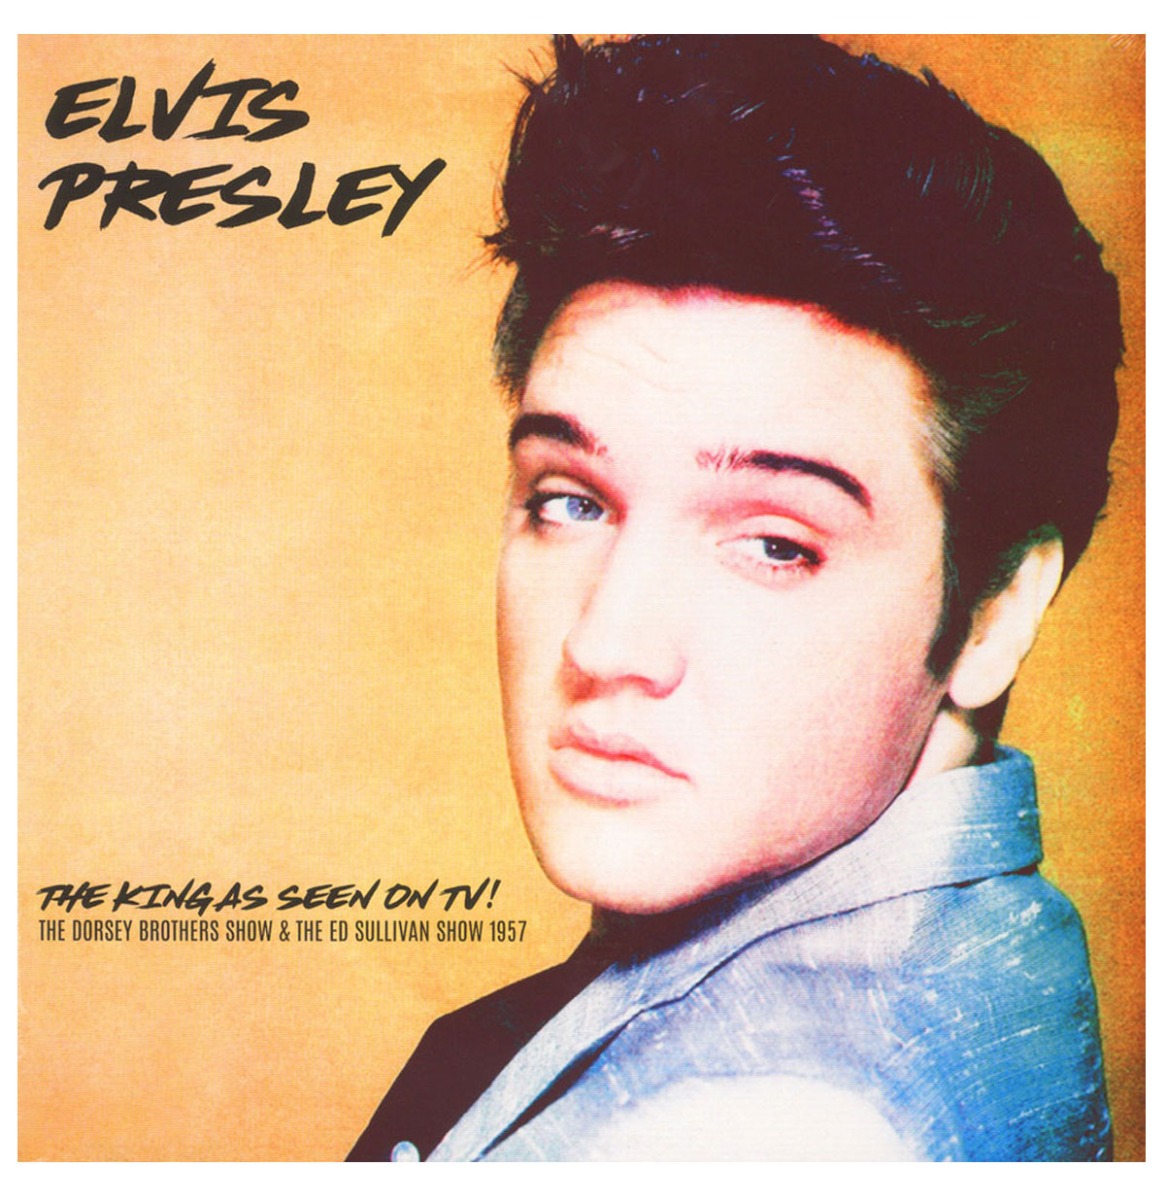 Elvis Presley - The King As Seen On TV! The Dorsey Brothers Show & The Ed Sullivan Show 1957 LP